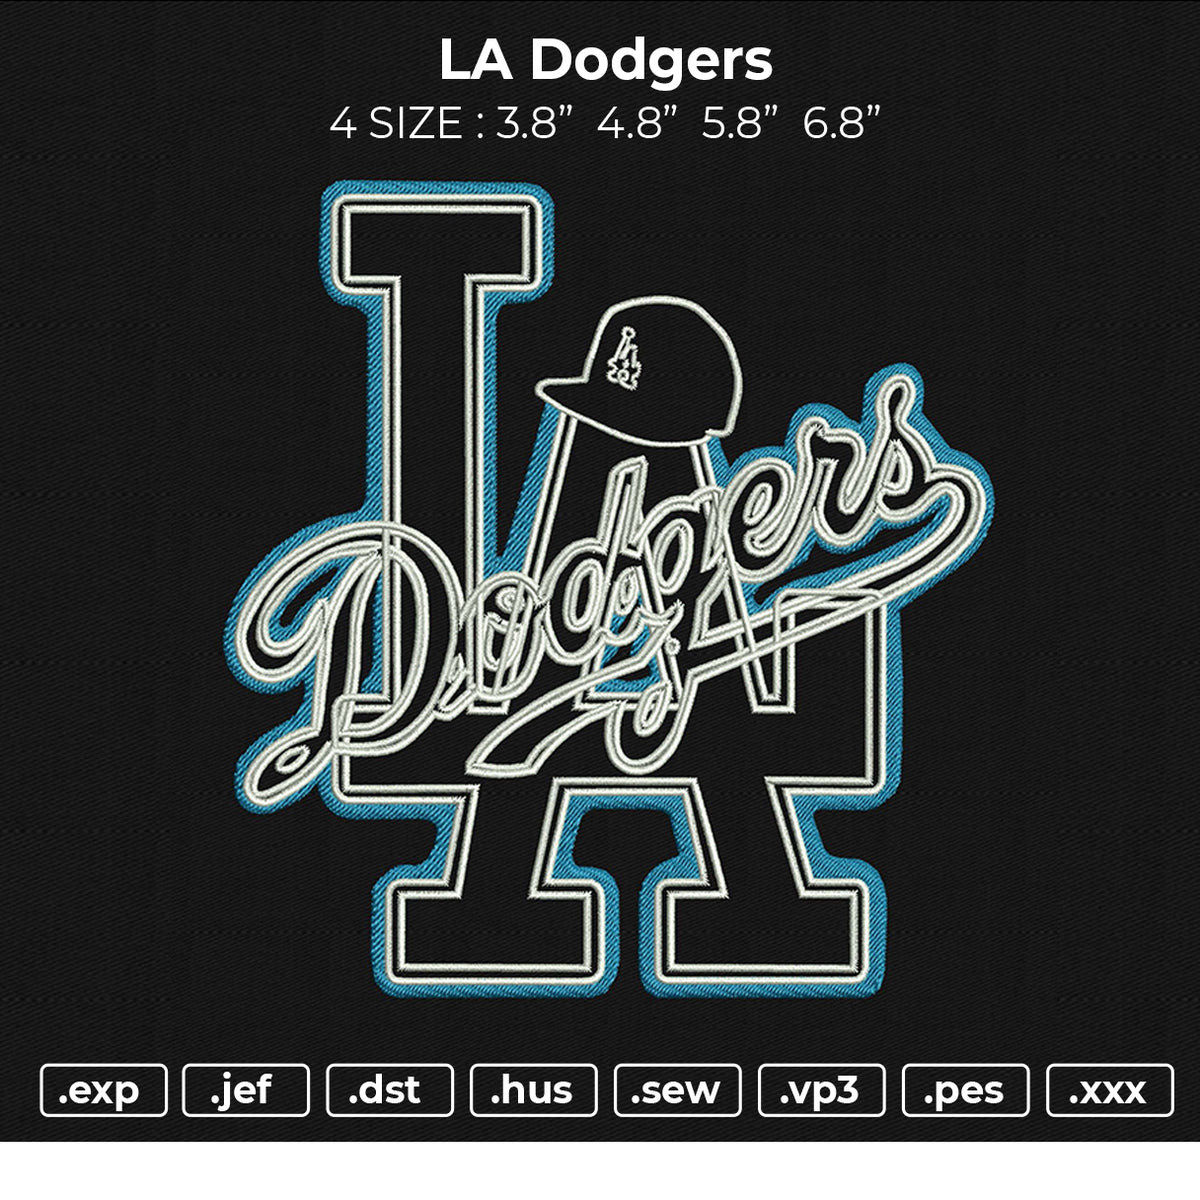 Los Angeles Dodgers Embroidery design, Dodgers logo Embroidery Files,  Dodgers Embroidery machine